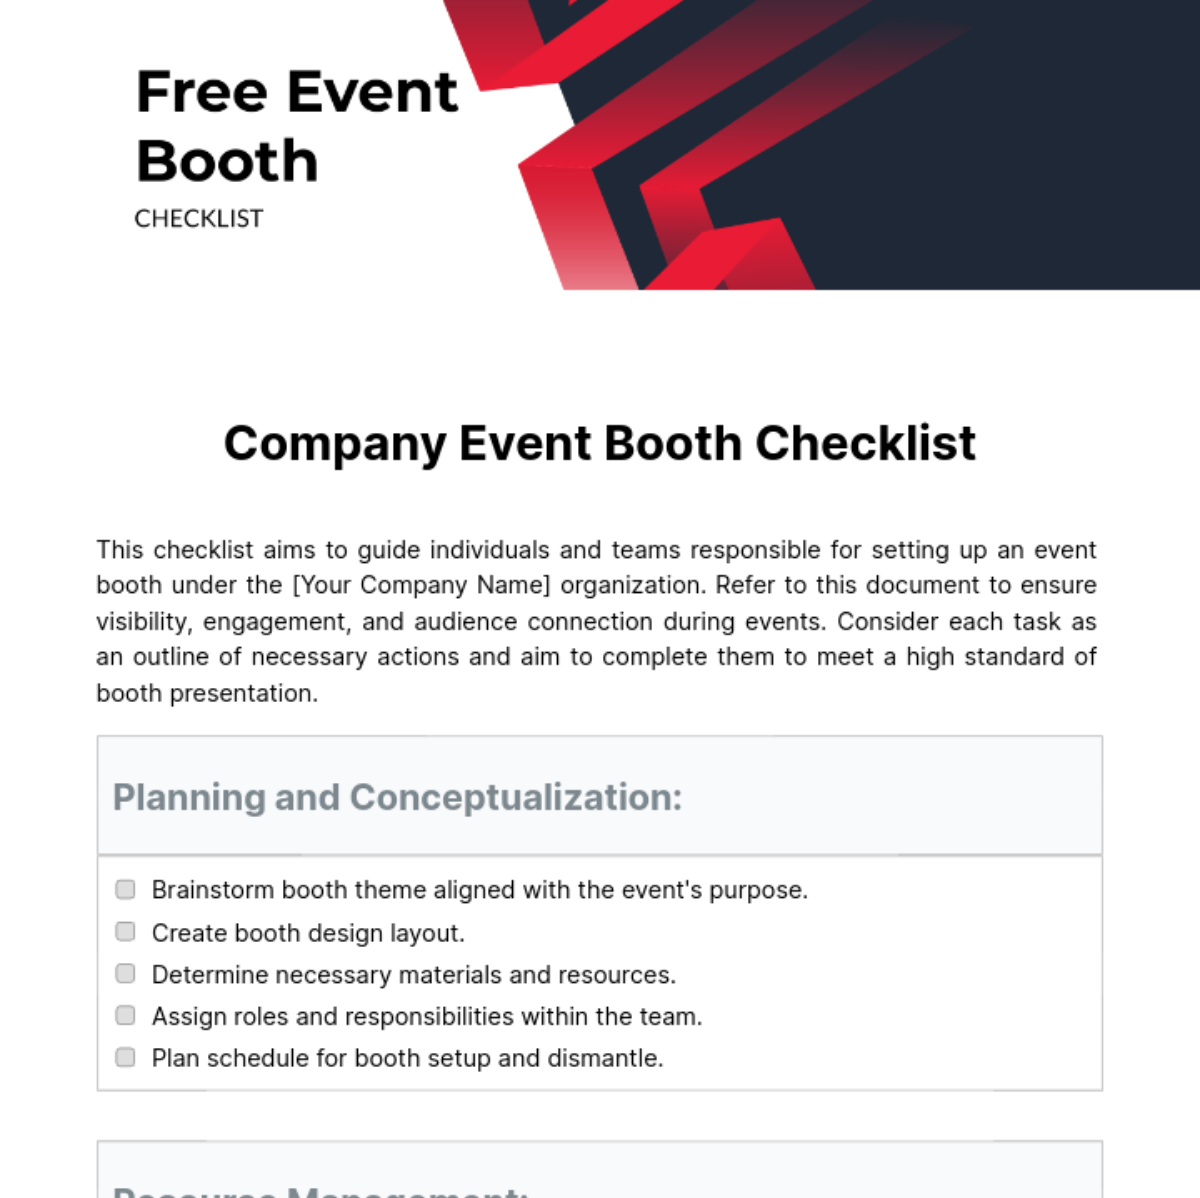 Free Event Booth Checklist Template